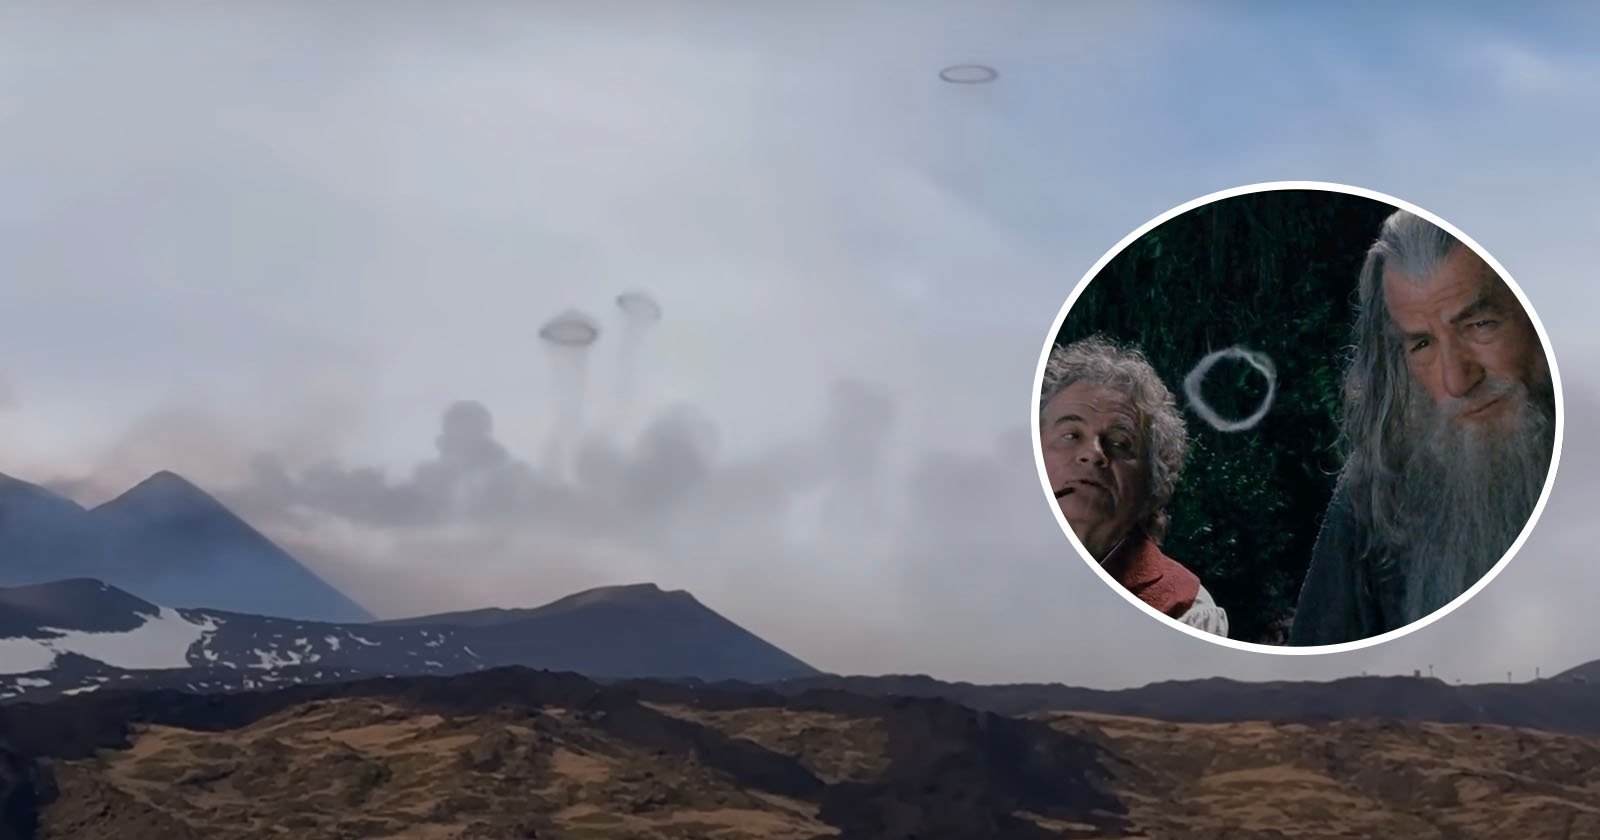 Perfect Smoke Rings Blow Out of the ‘Gandalf of Volcanoes’